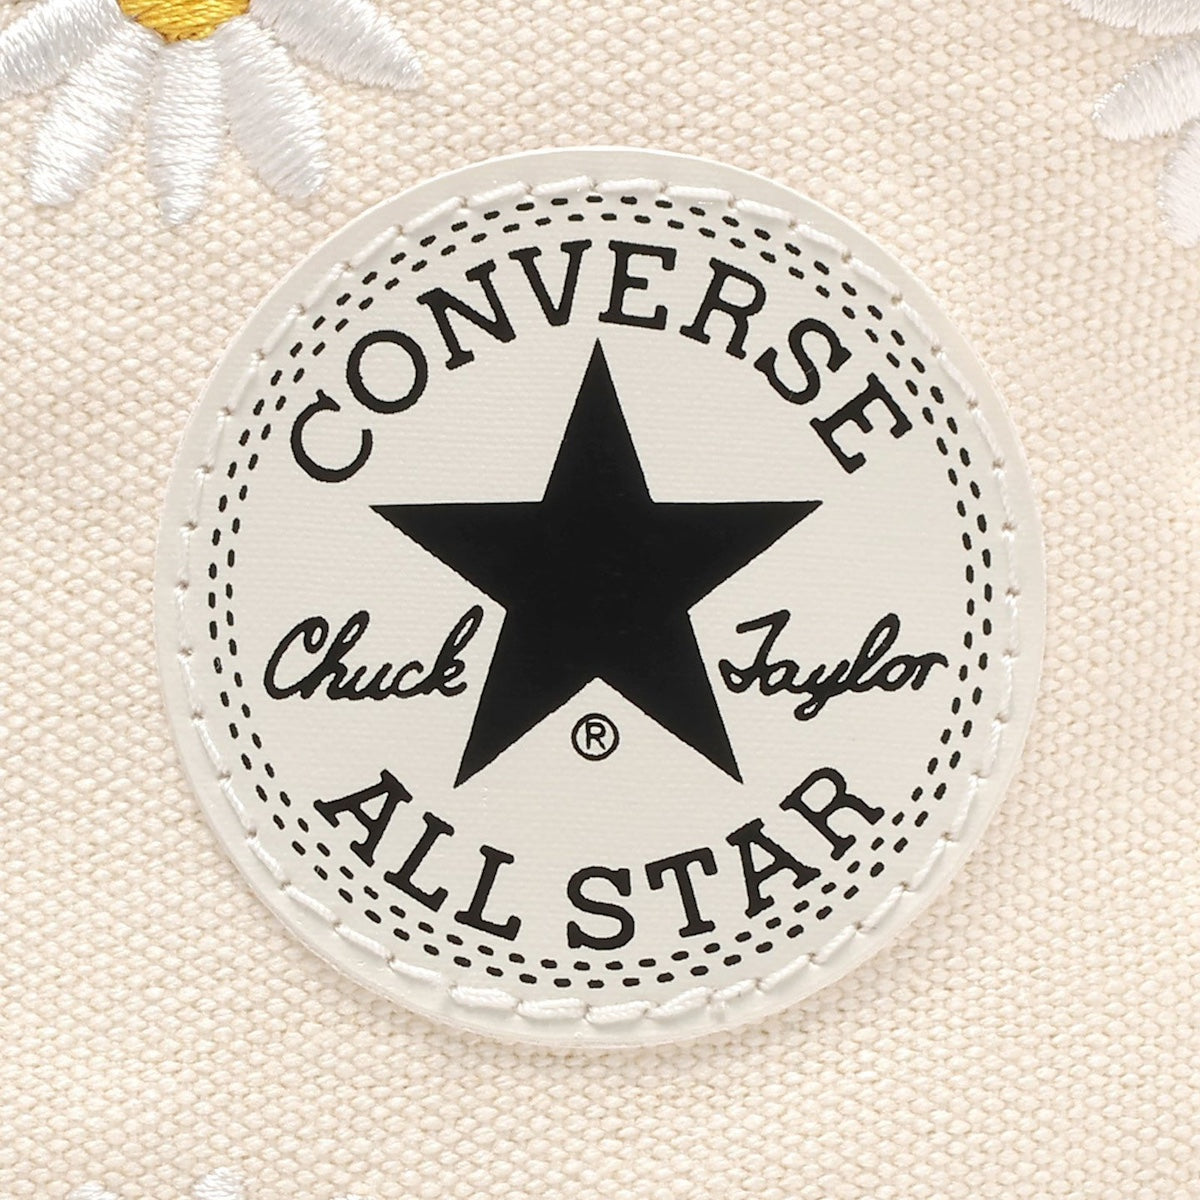 ALL STAR (R) DAISYFLOWER HI – Kinetics｜OFFICIAL ONLINE STORE